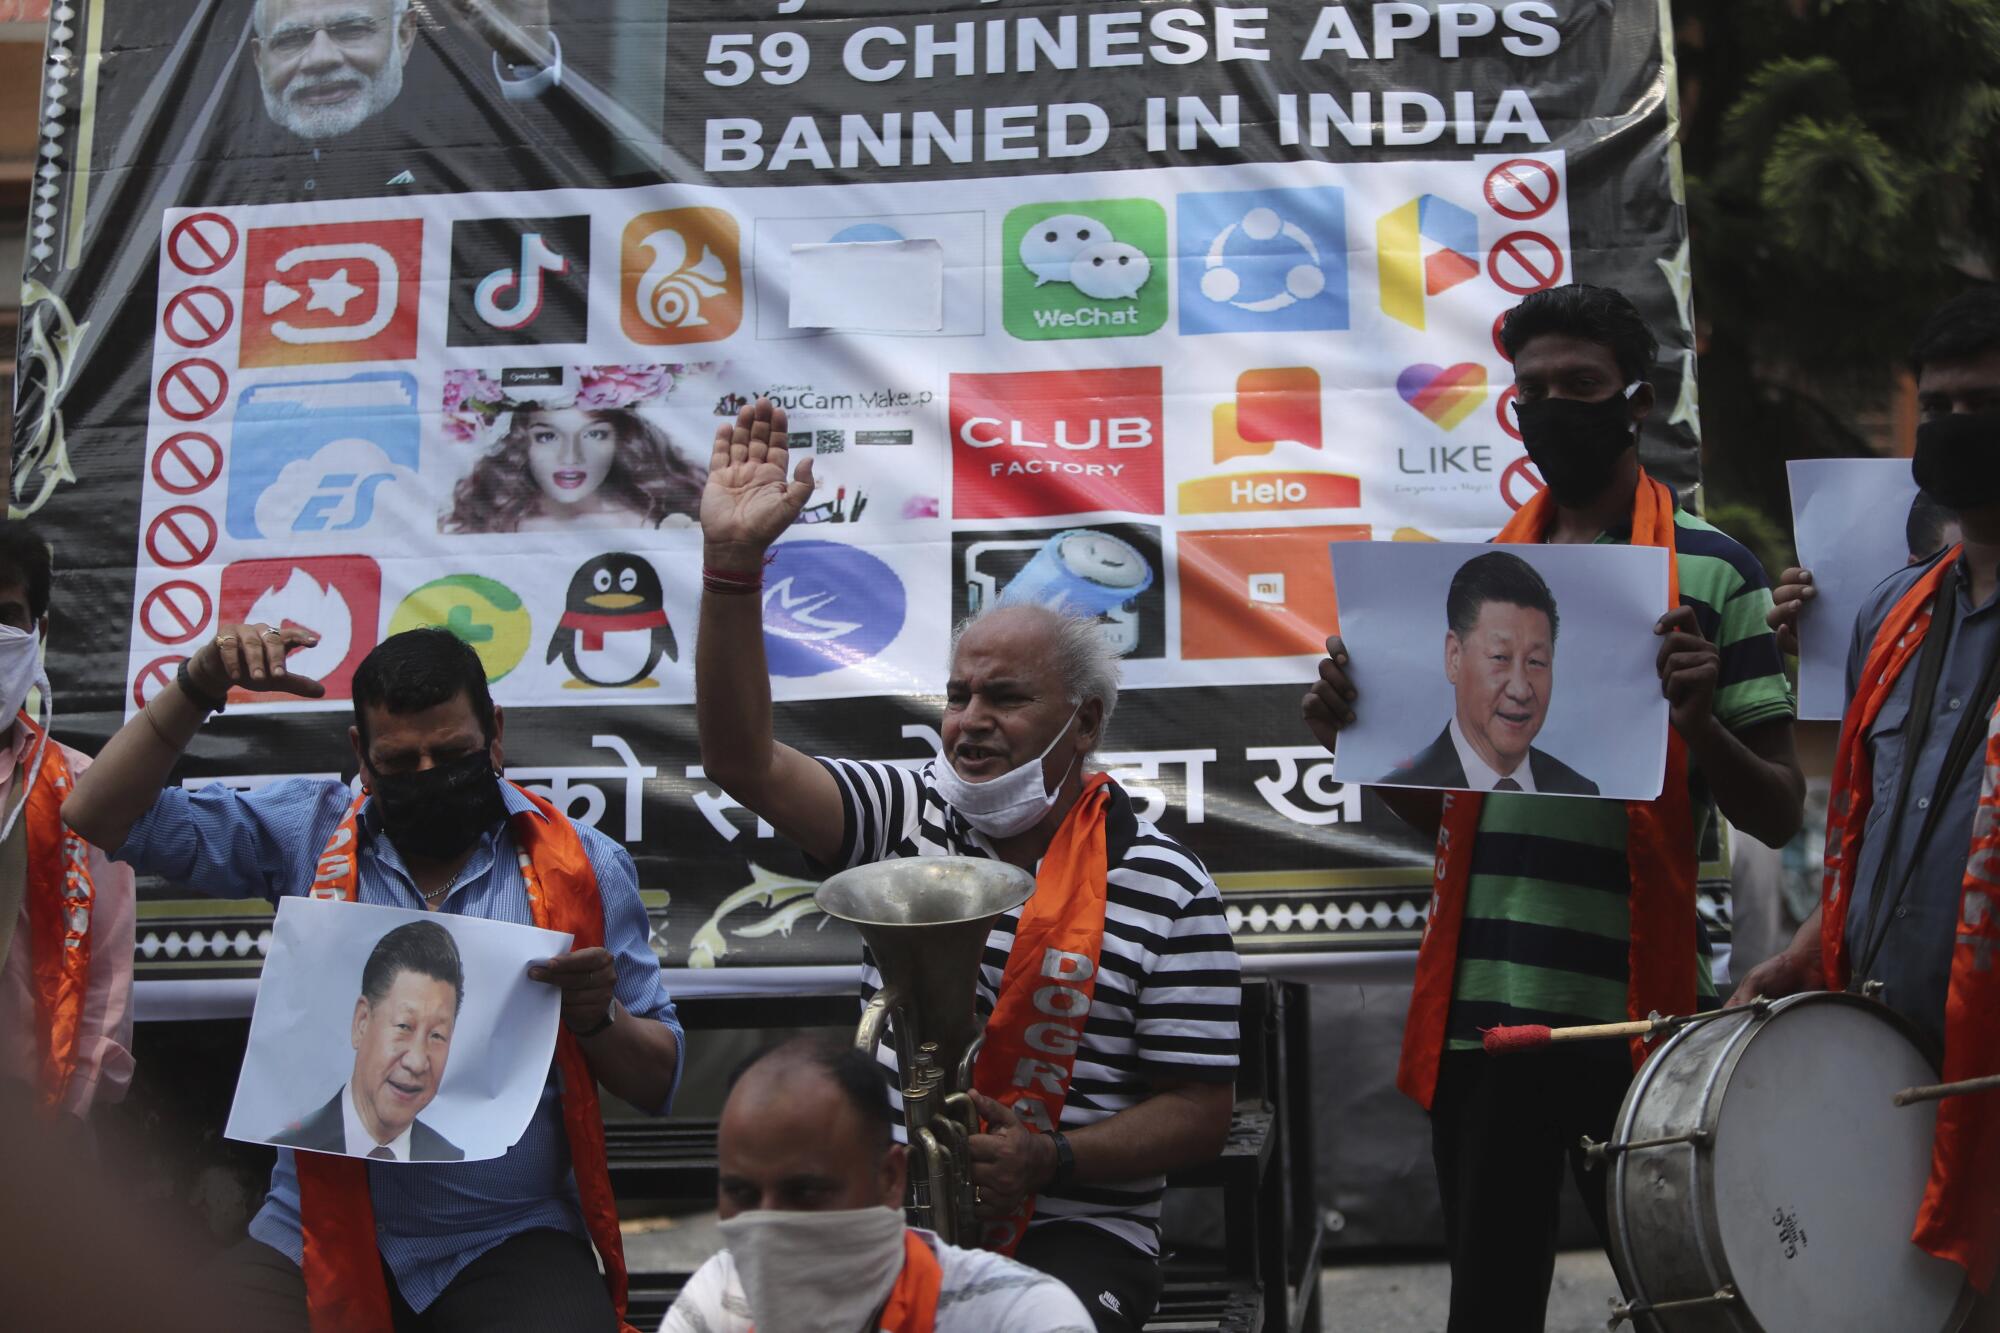 People holding musical instruments and images of a man raise hands in front of a large poster about banned Chinese apps